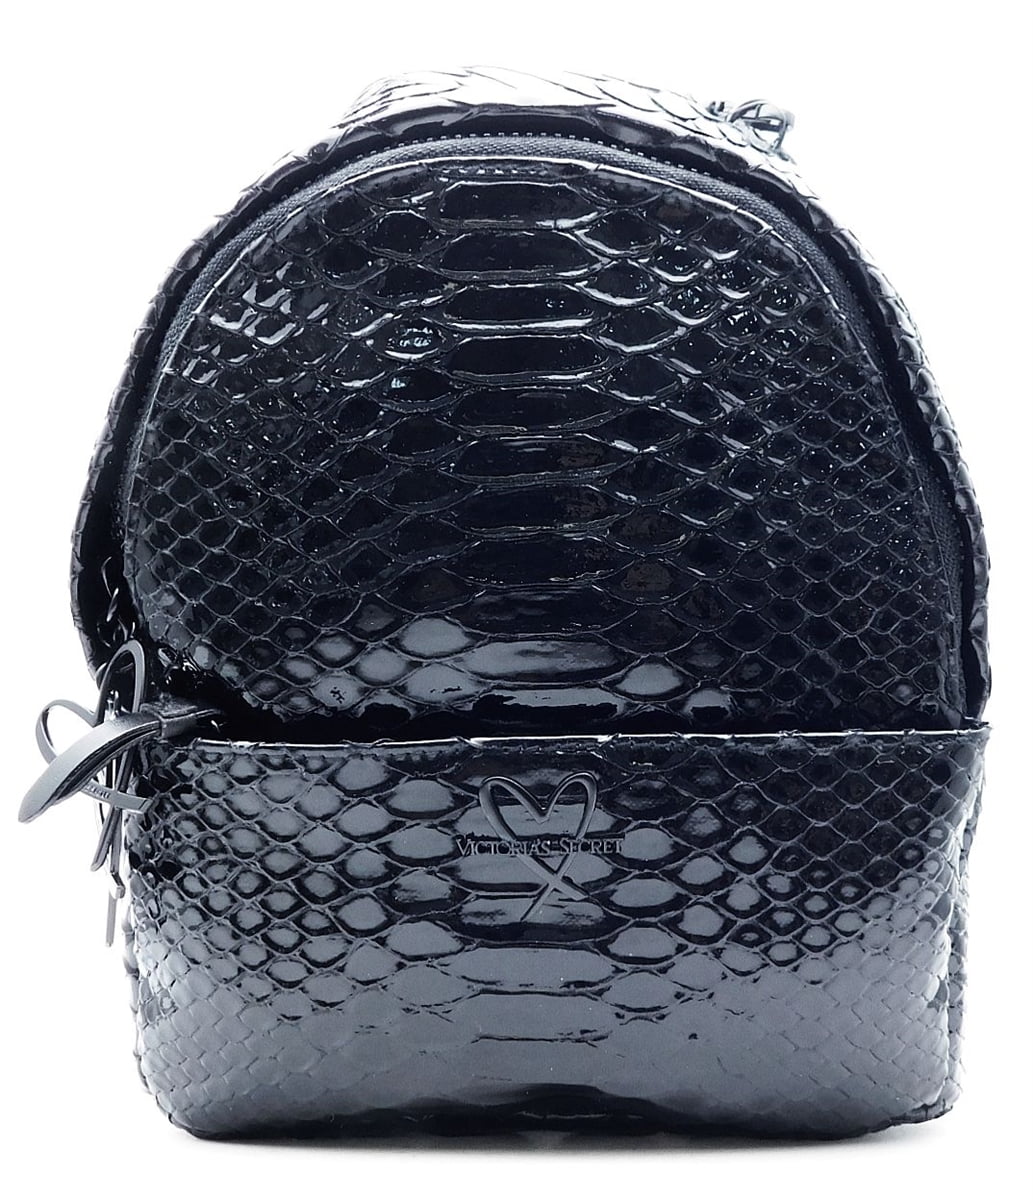 luxe mini backpack